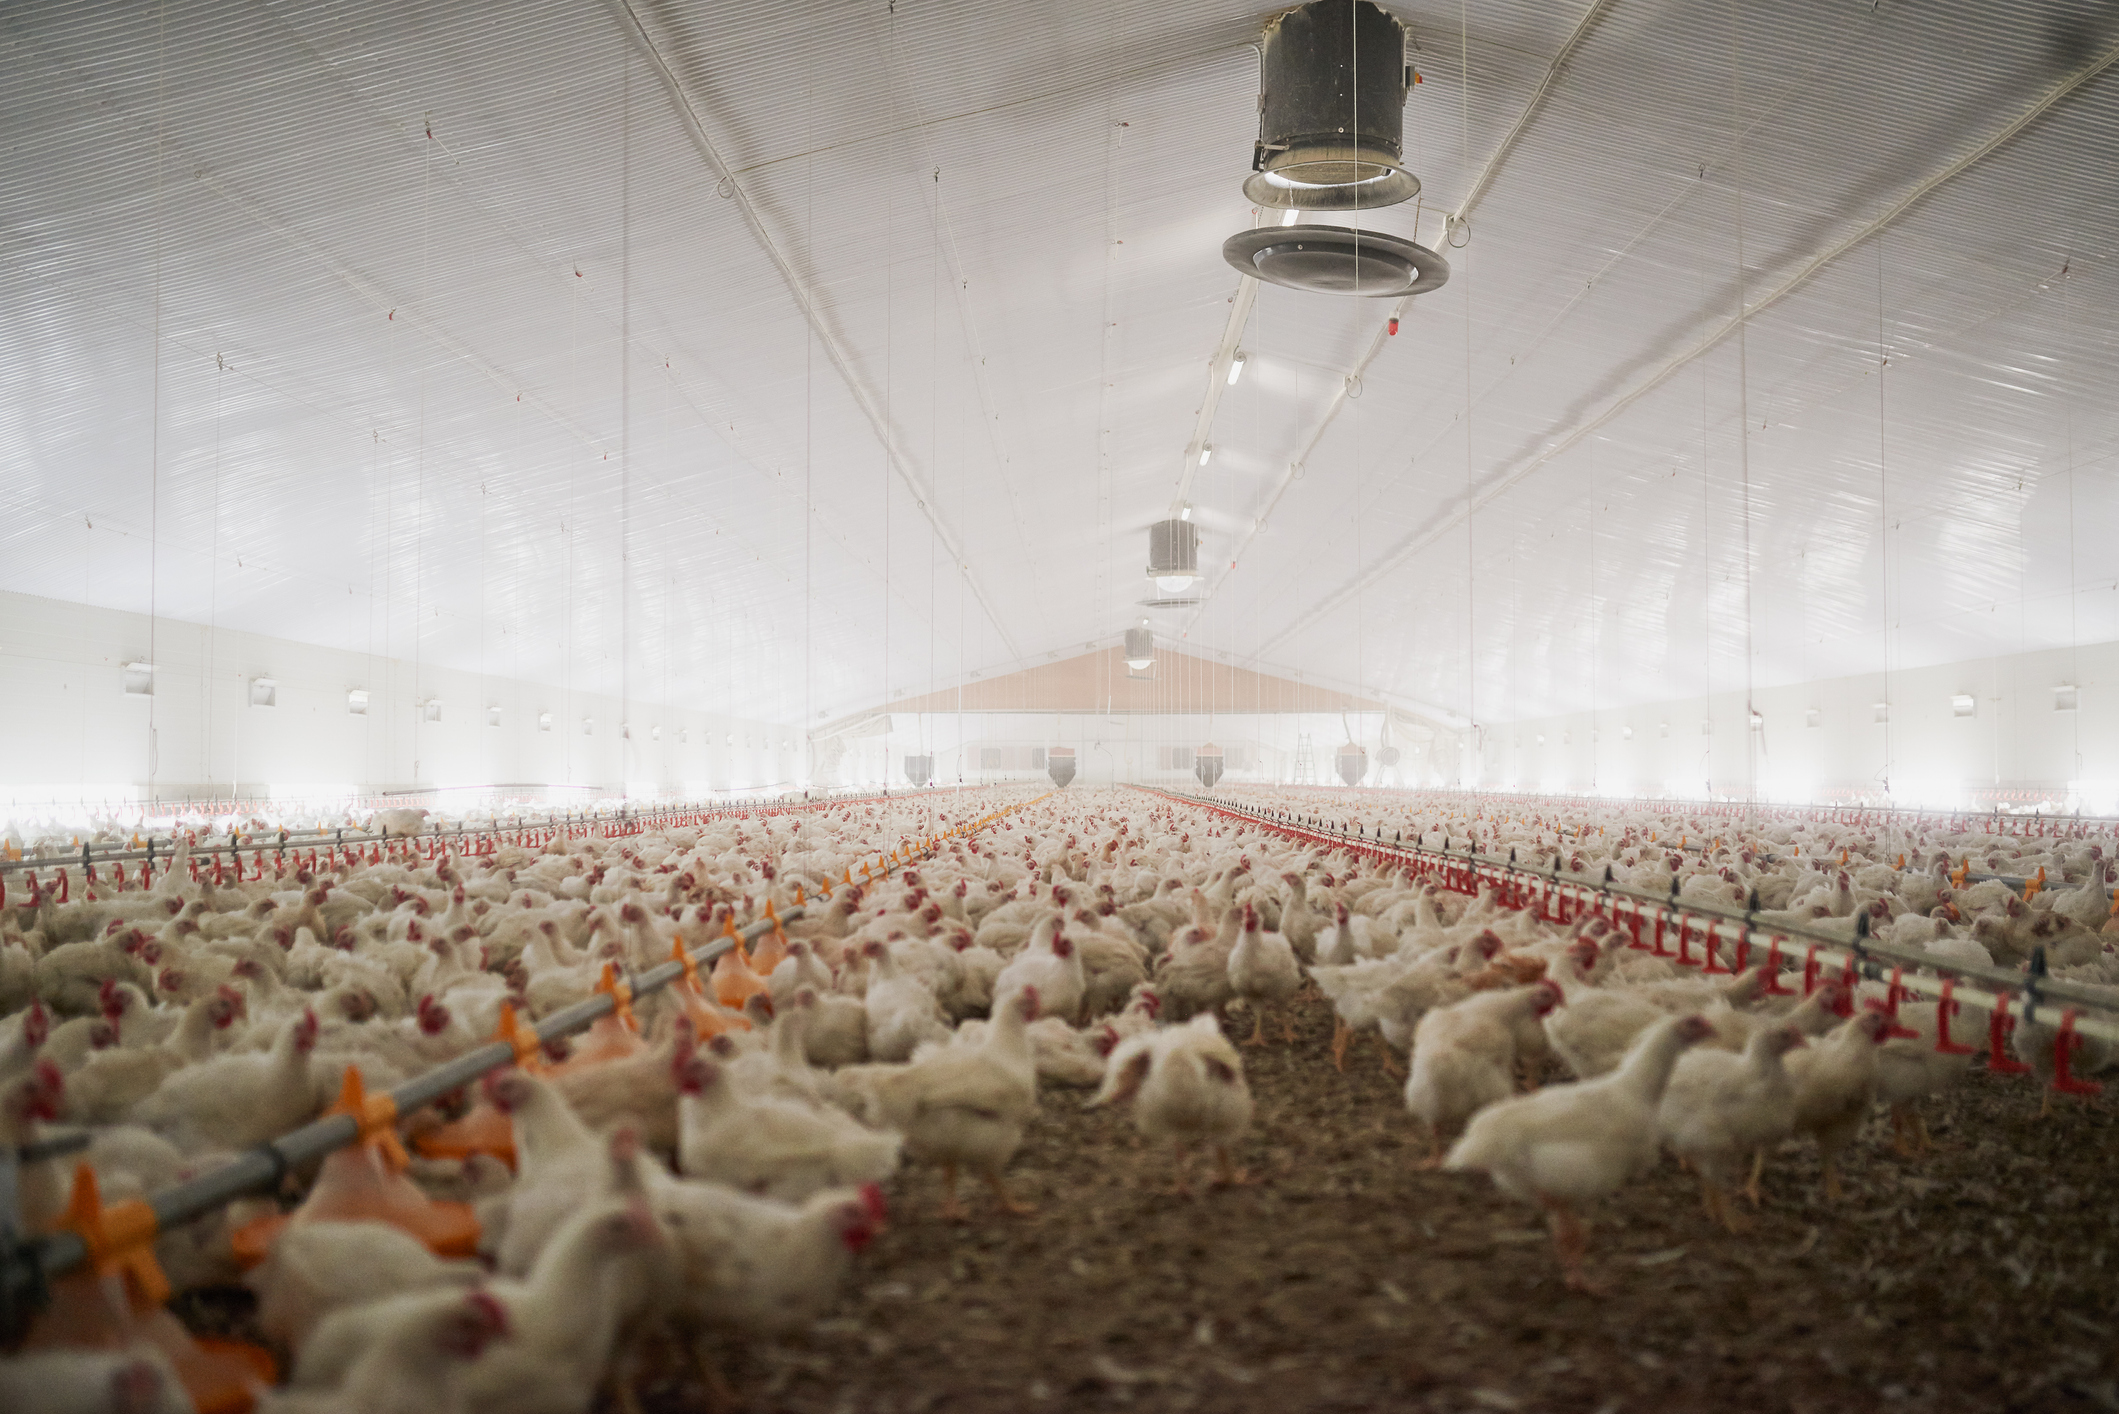 Shot of a large flock of chicken hens all together in a big warehouse on a farm